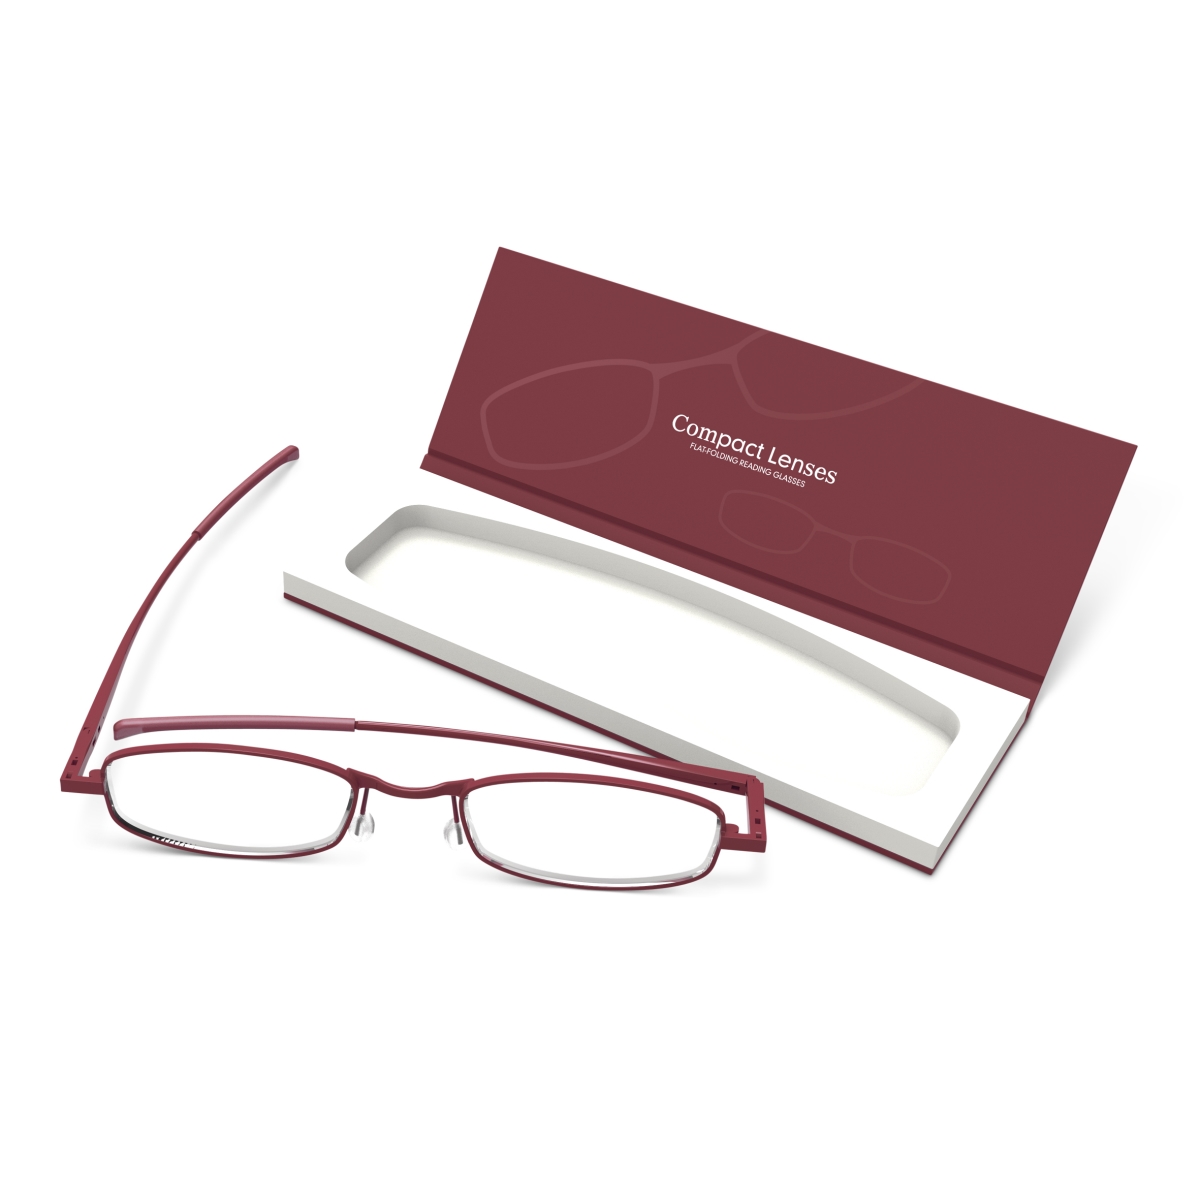 Picture of If USA 91733 Compact Lens Flat Folding Reading Glasses, Port - Plus 2.0